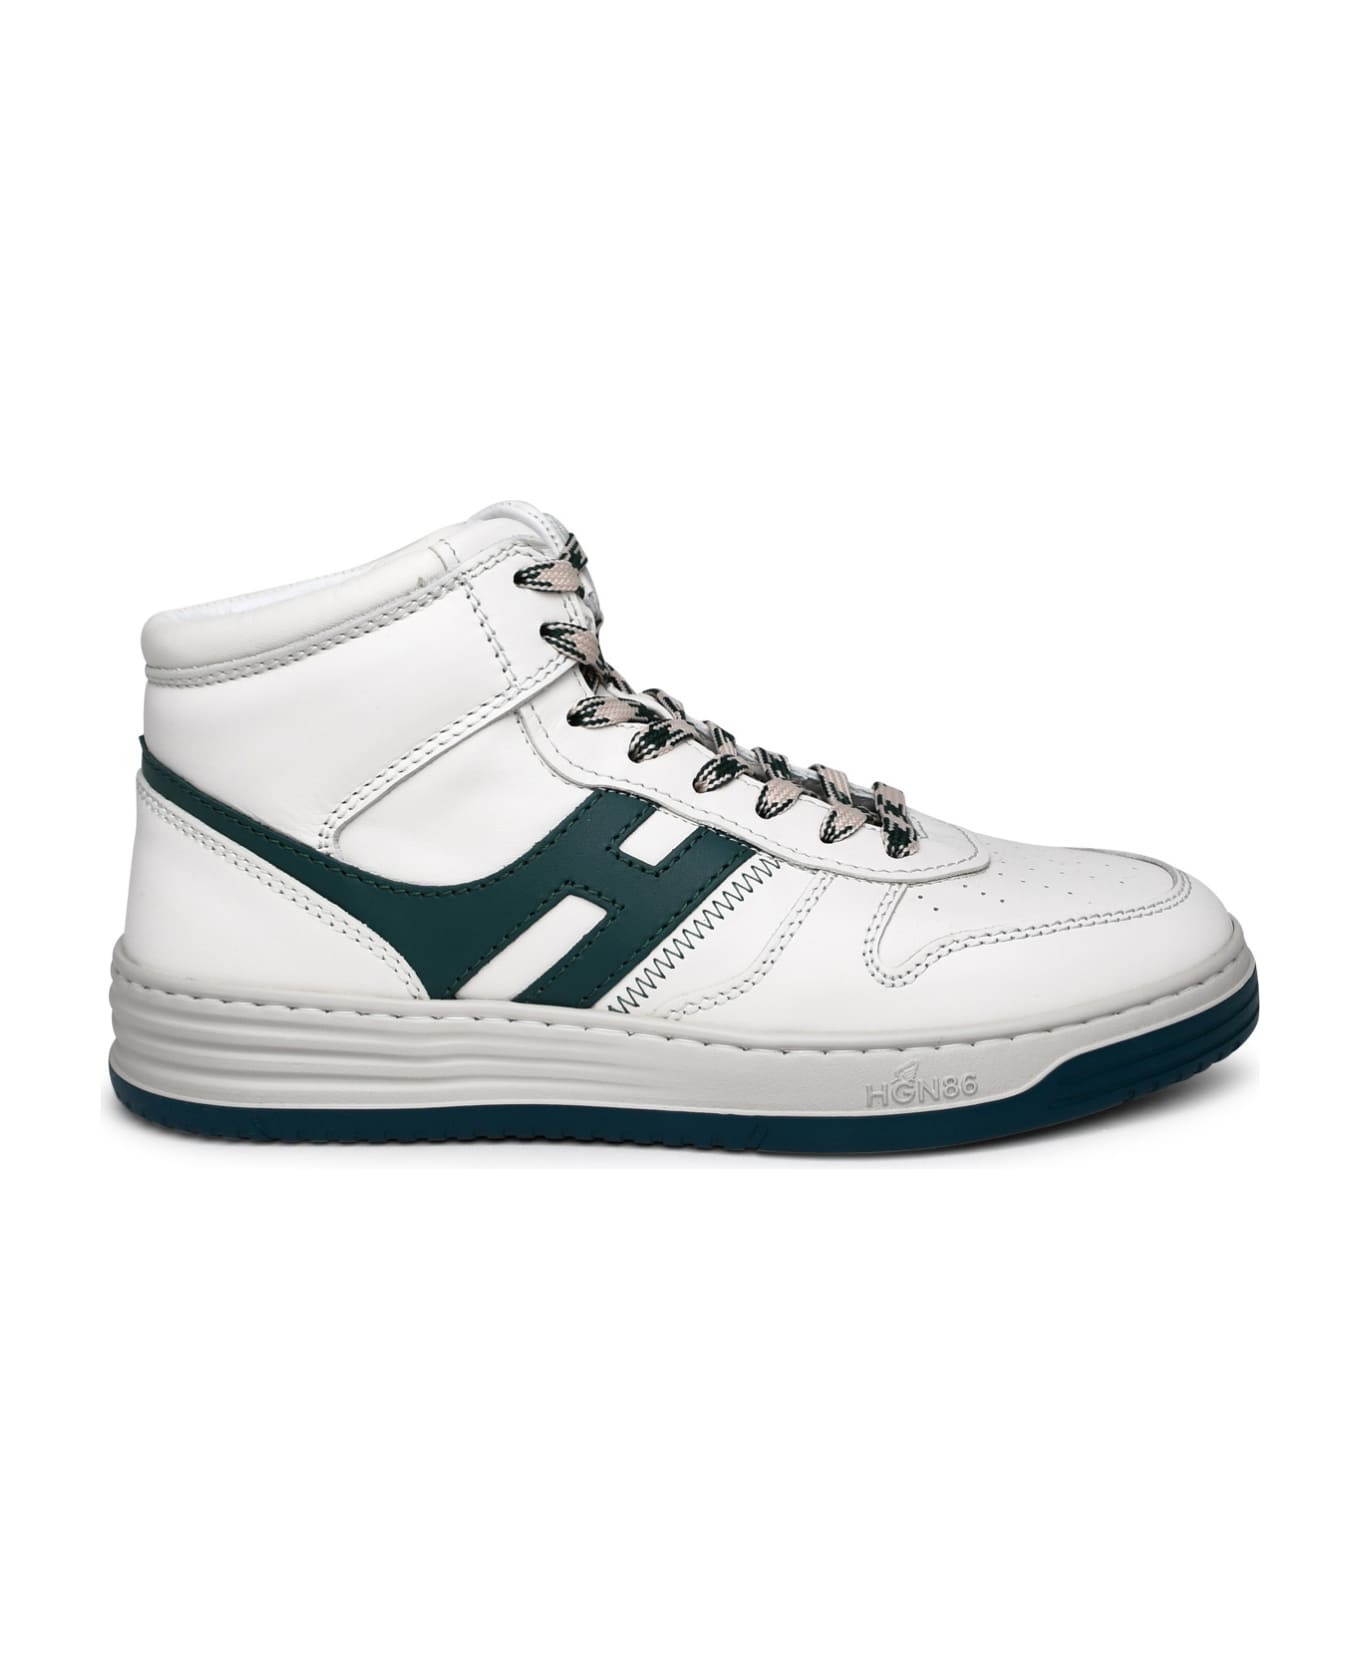 Hogan Leather Sneakers - White